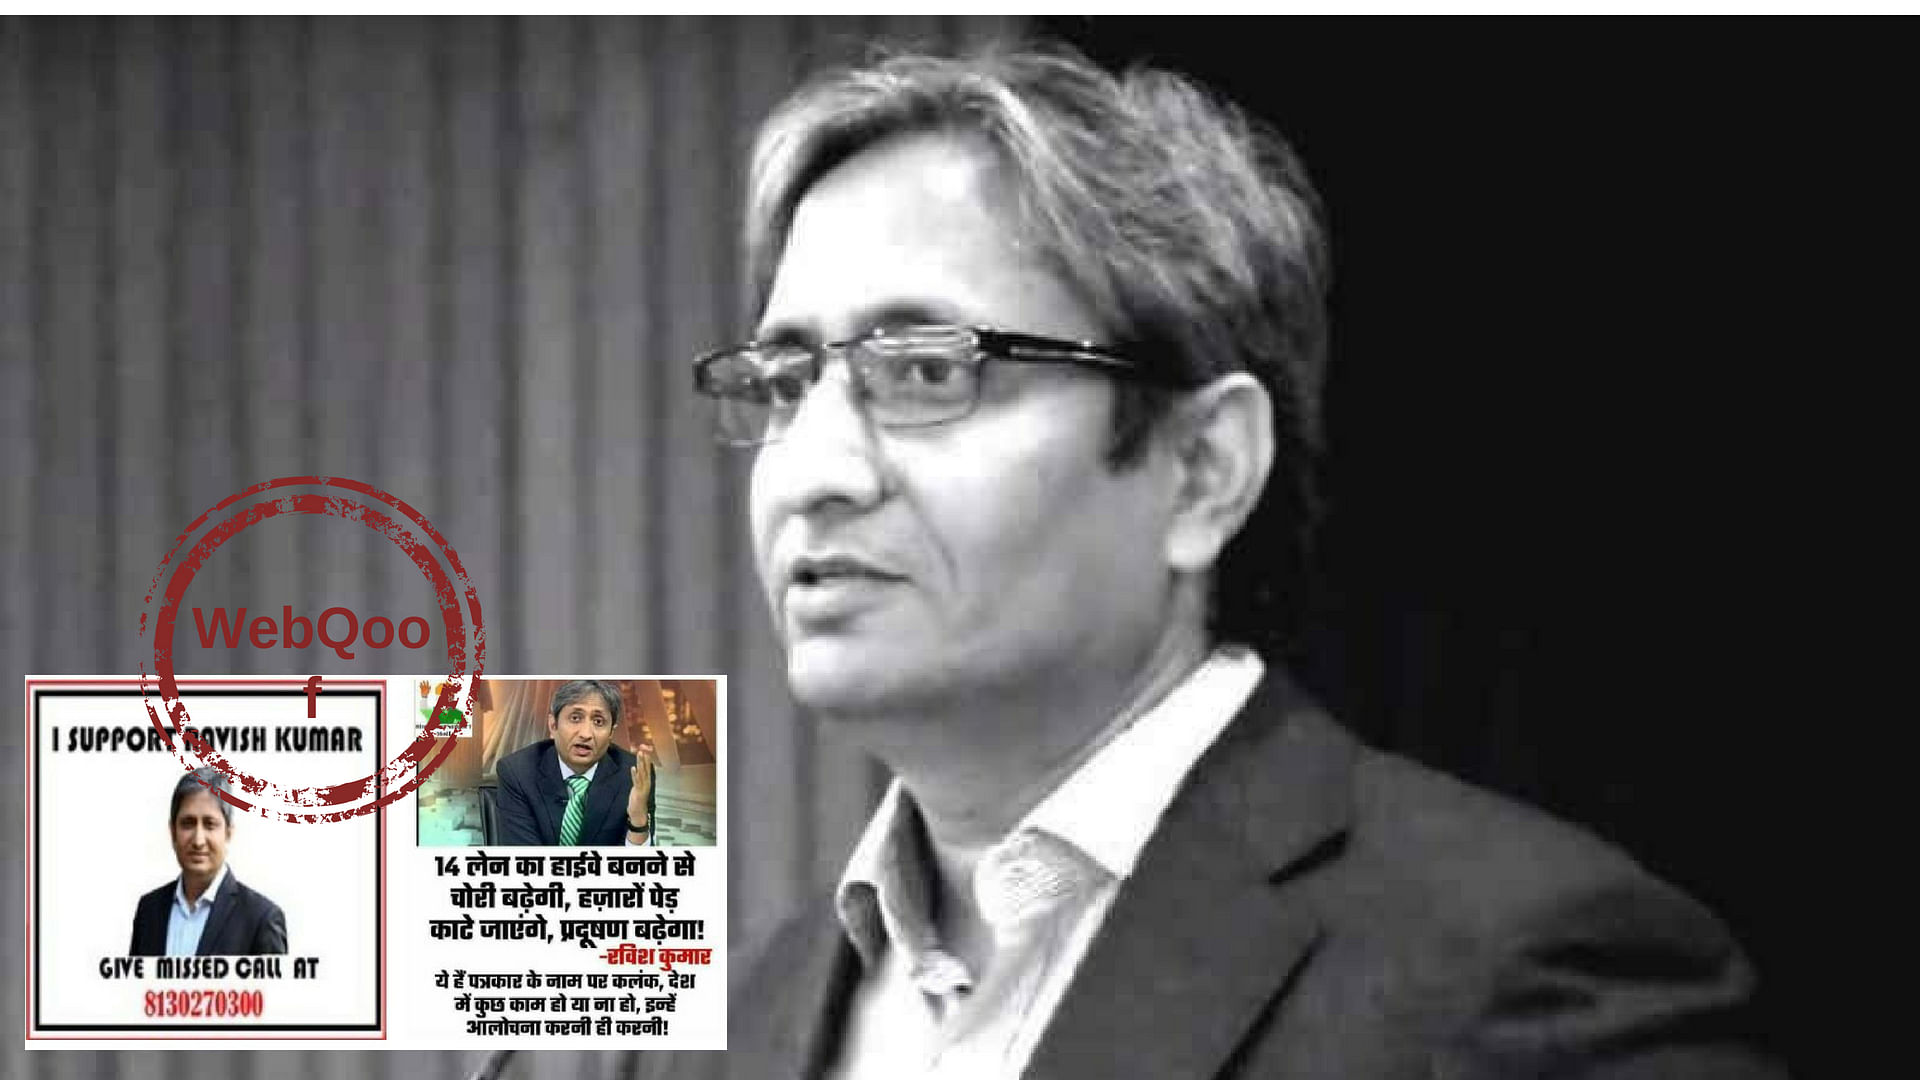 Journalist Ravish Kumar has been a target of a string of death threats and abusive phone calls in the past.